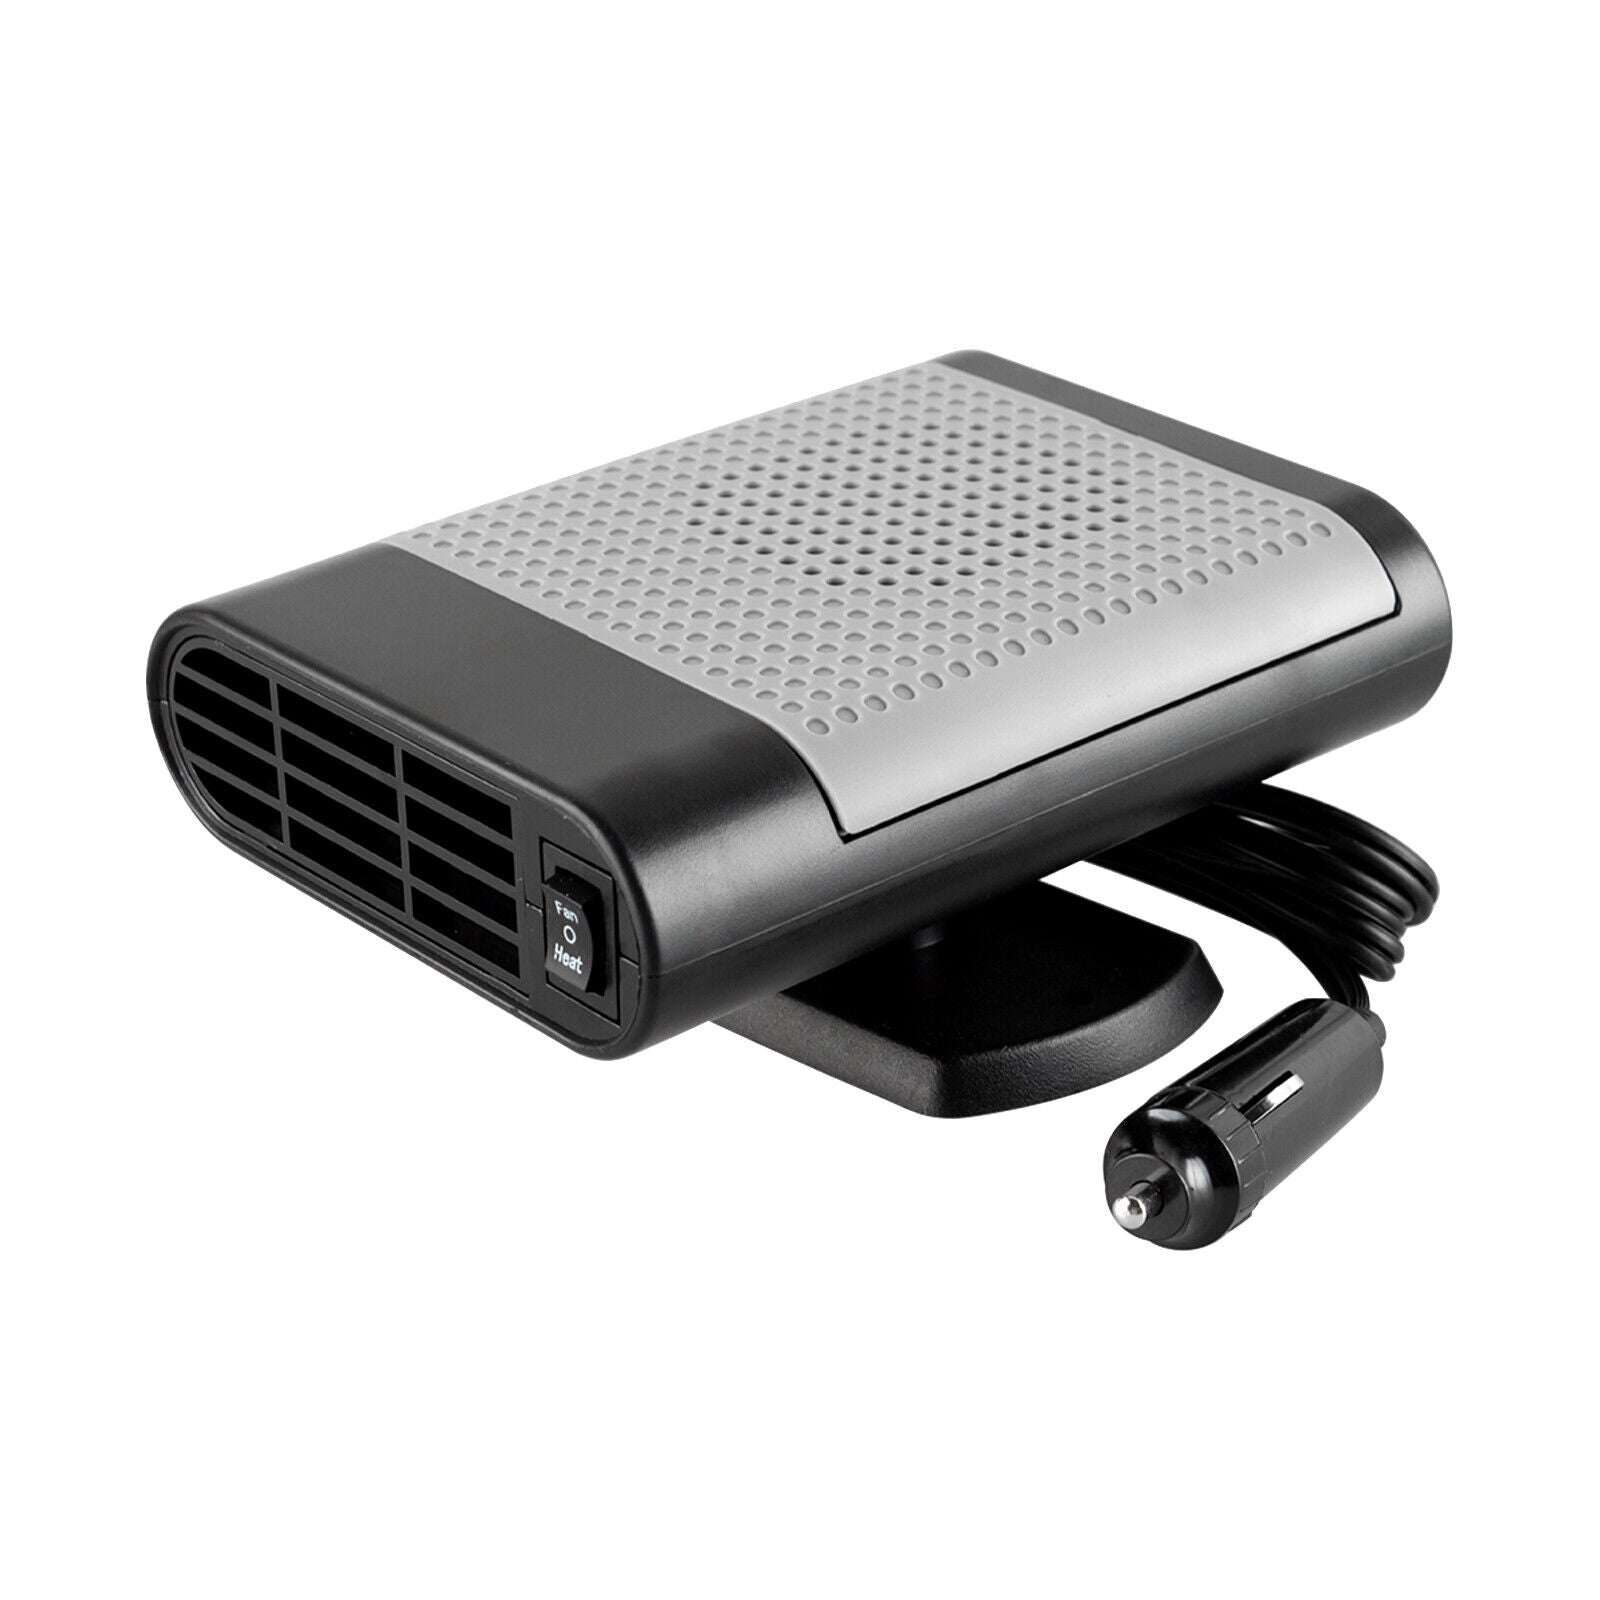 Car Heater with Heating and Cooling Modes 12V 150W Car Defroster with hoWuJ